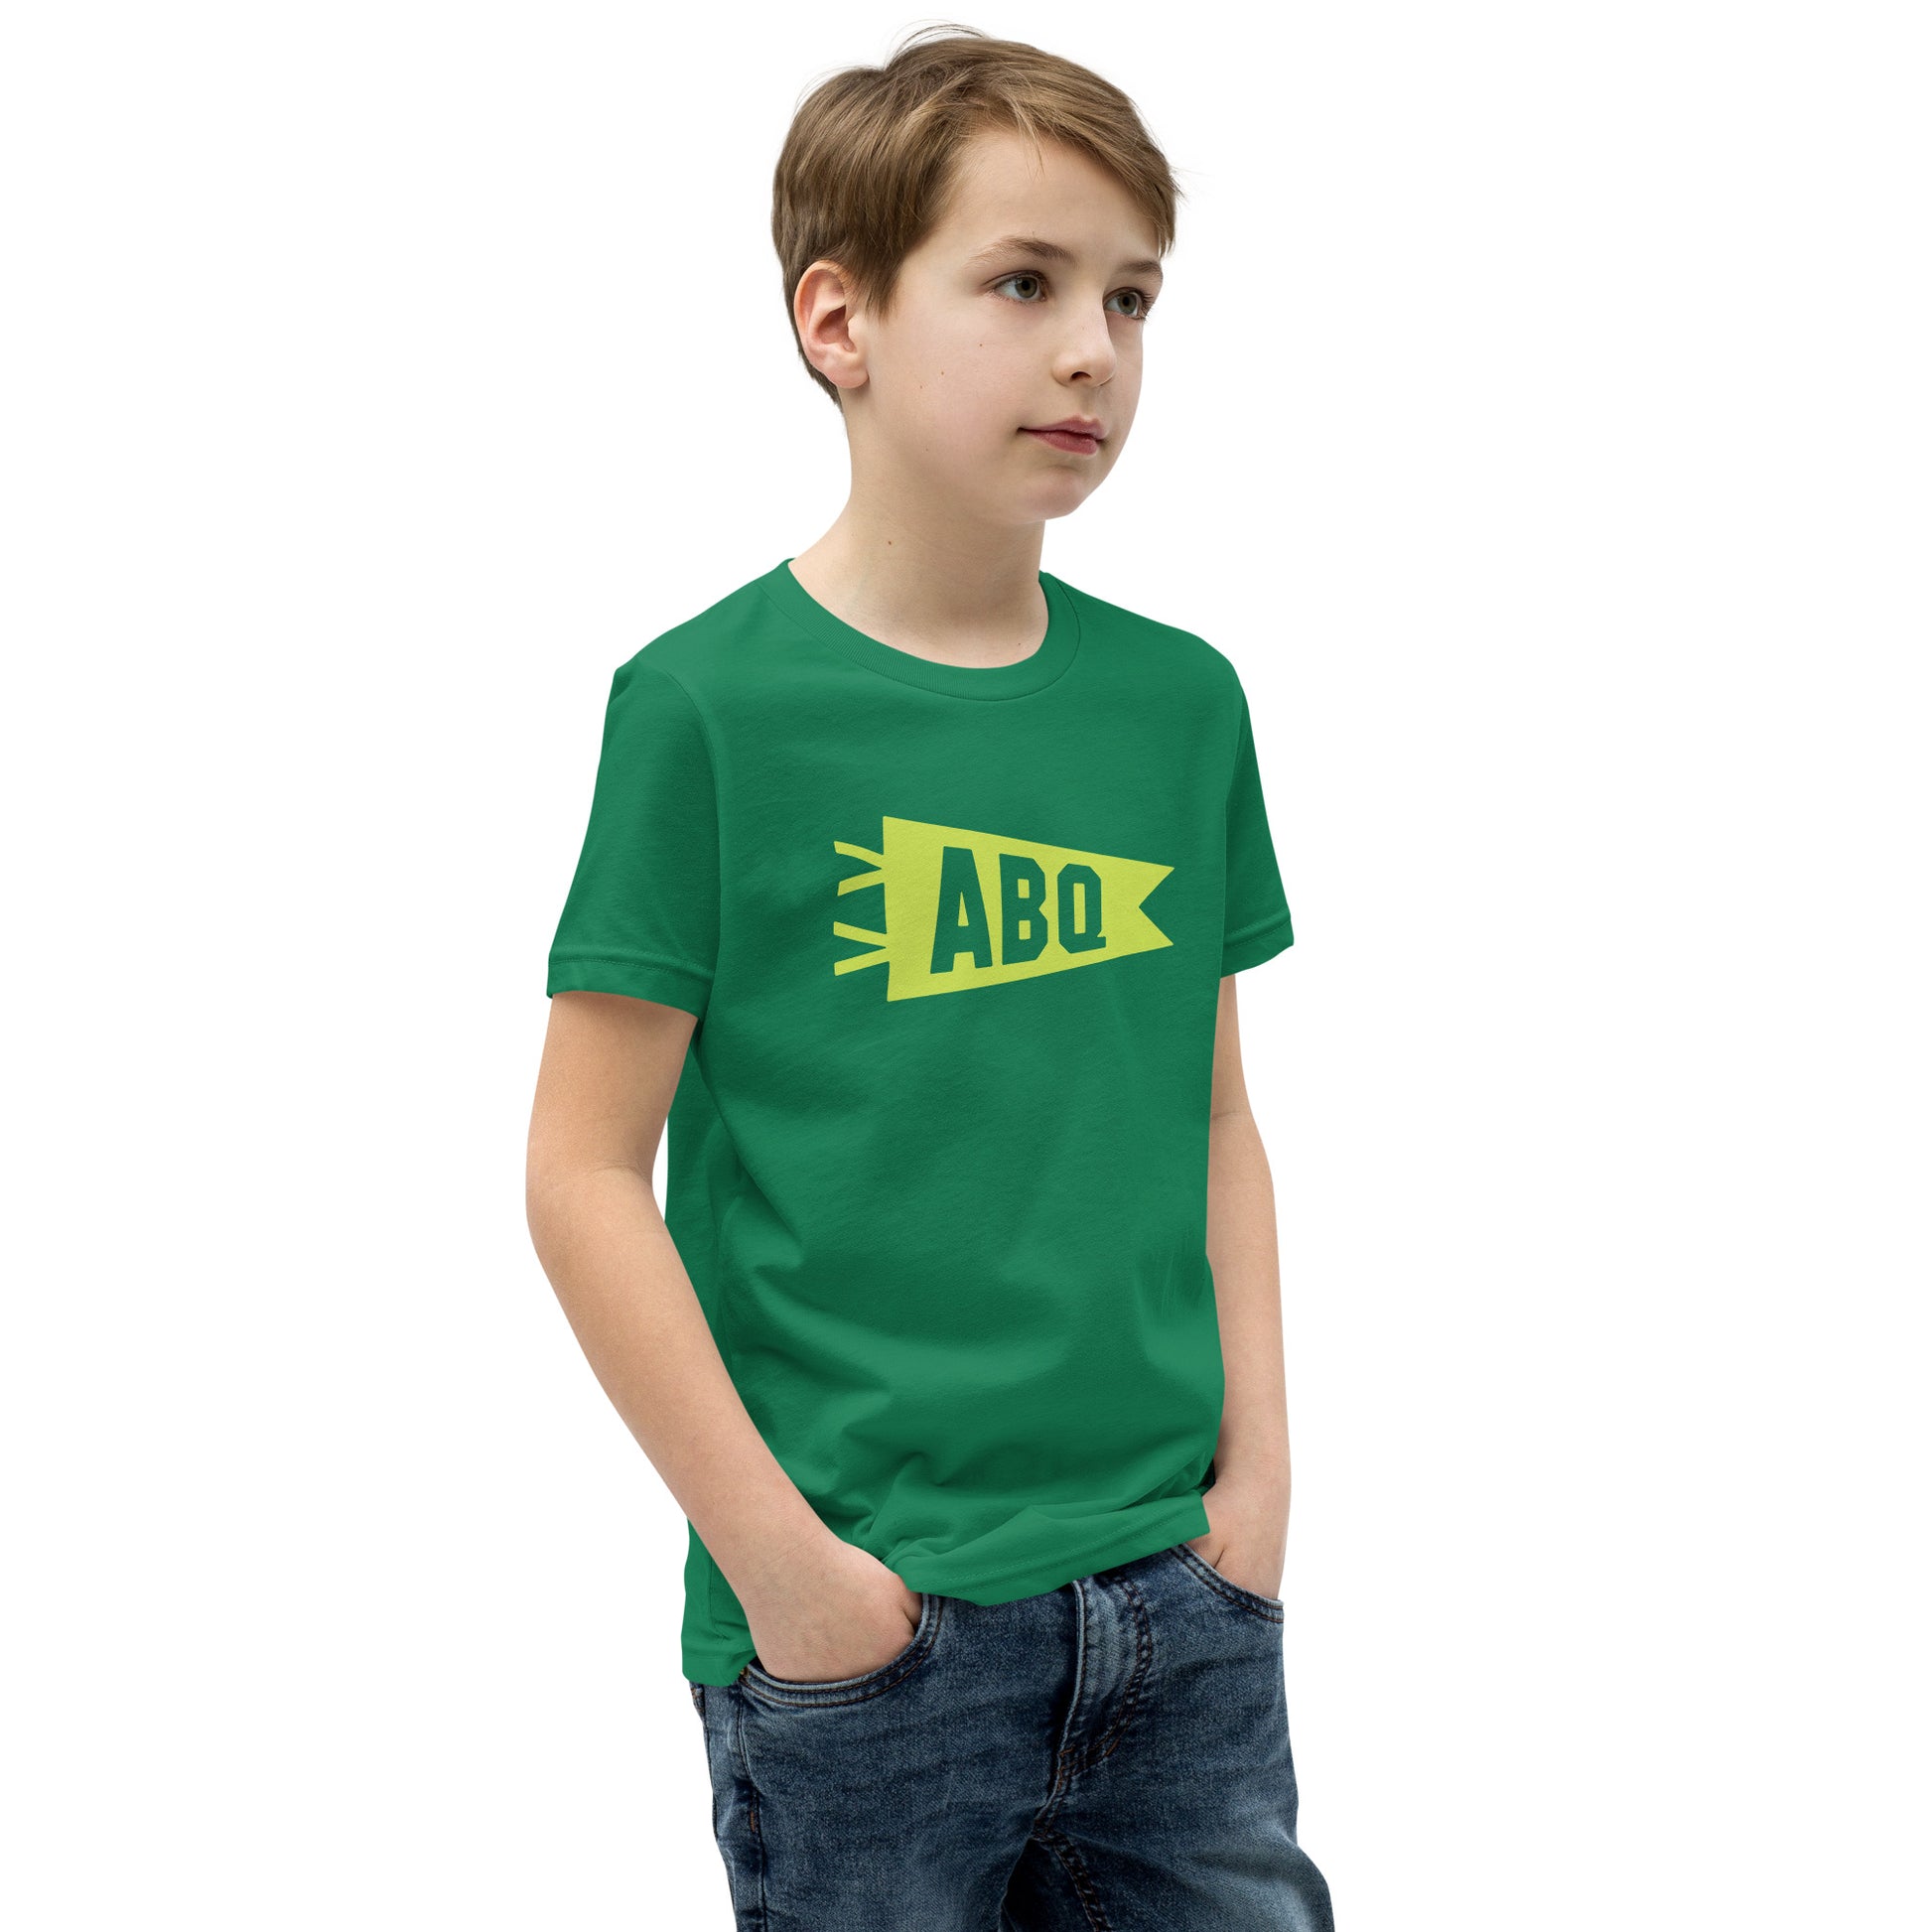 Kid's Airport Code Tee - Green Graphic • ABQ Albuquerque • YHM Designs - Image 07